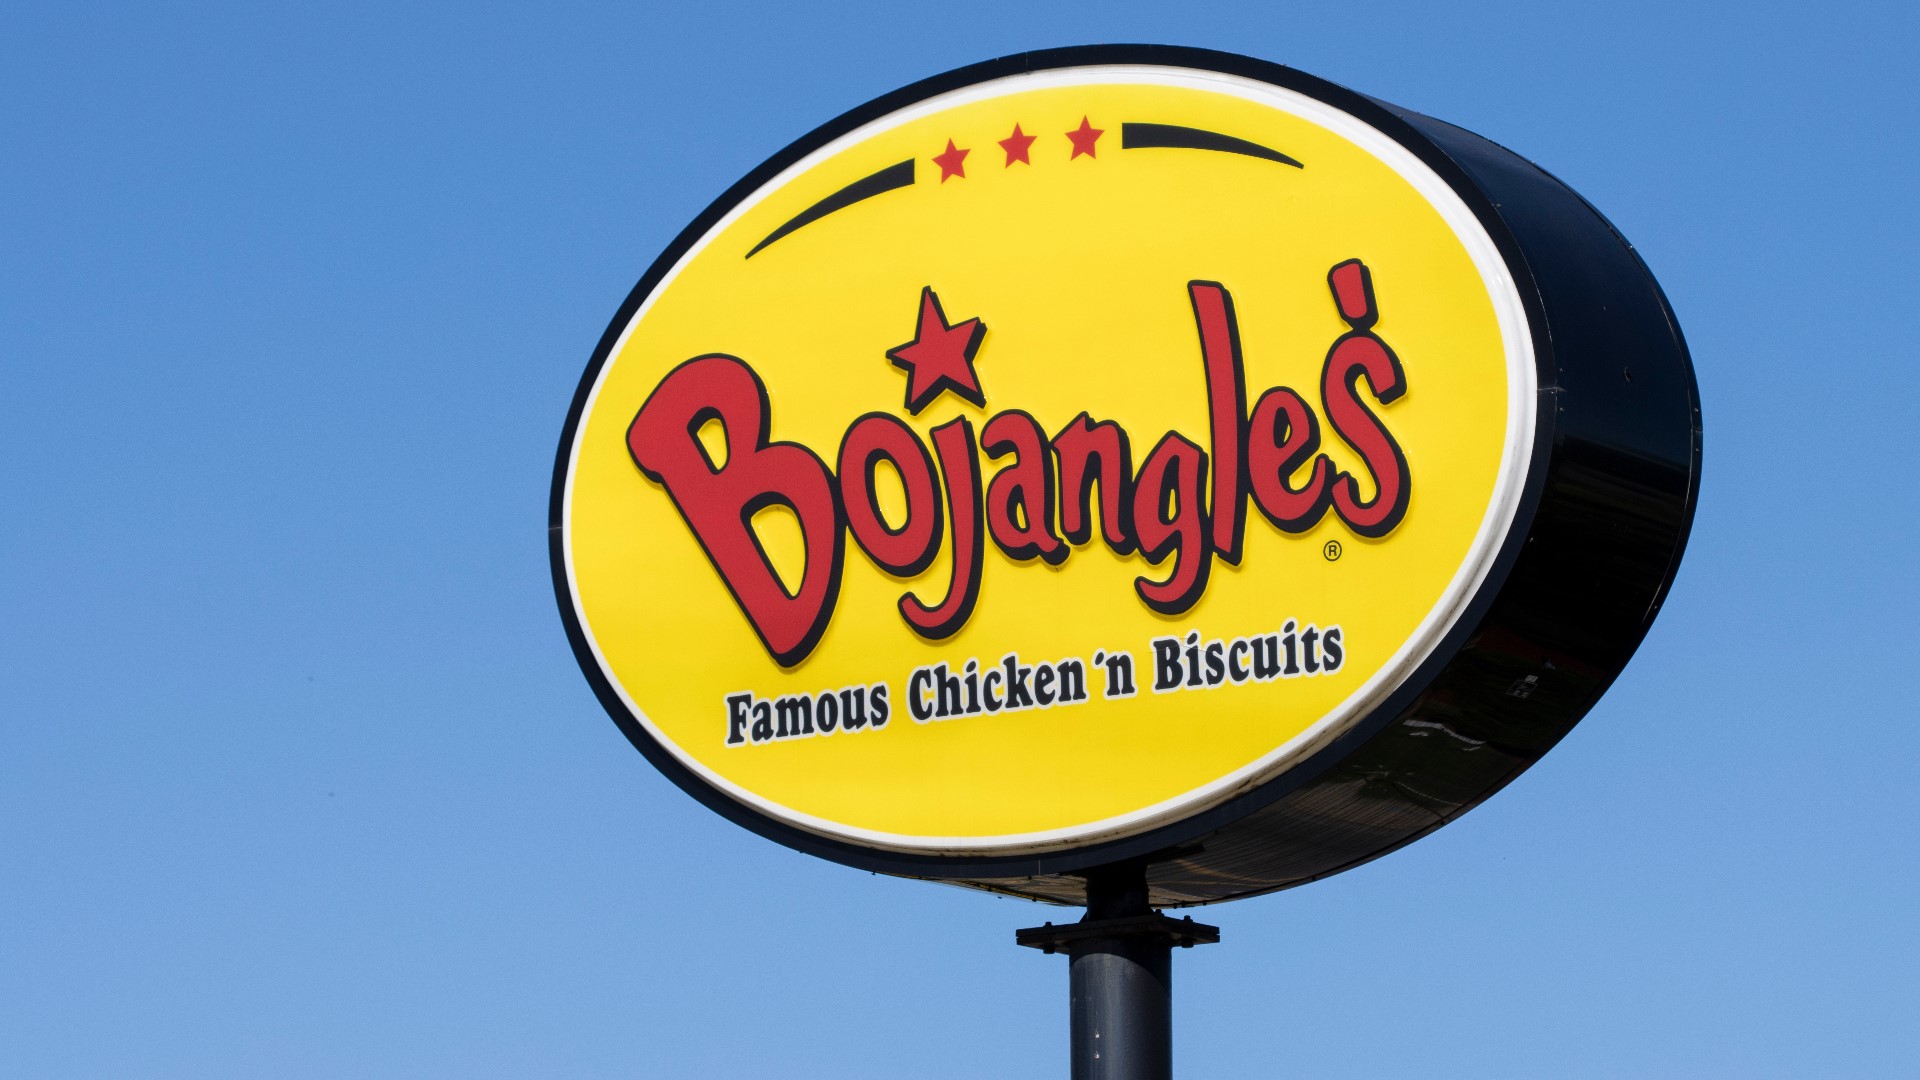 Charlotte-based Bojangles announced it will expand to Los Angeles, opening dozens of restaurants in southern California.